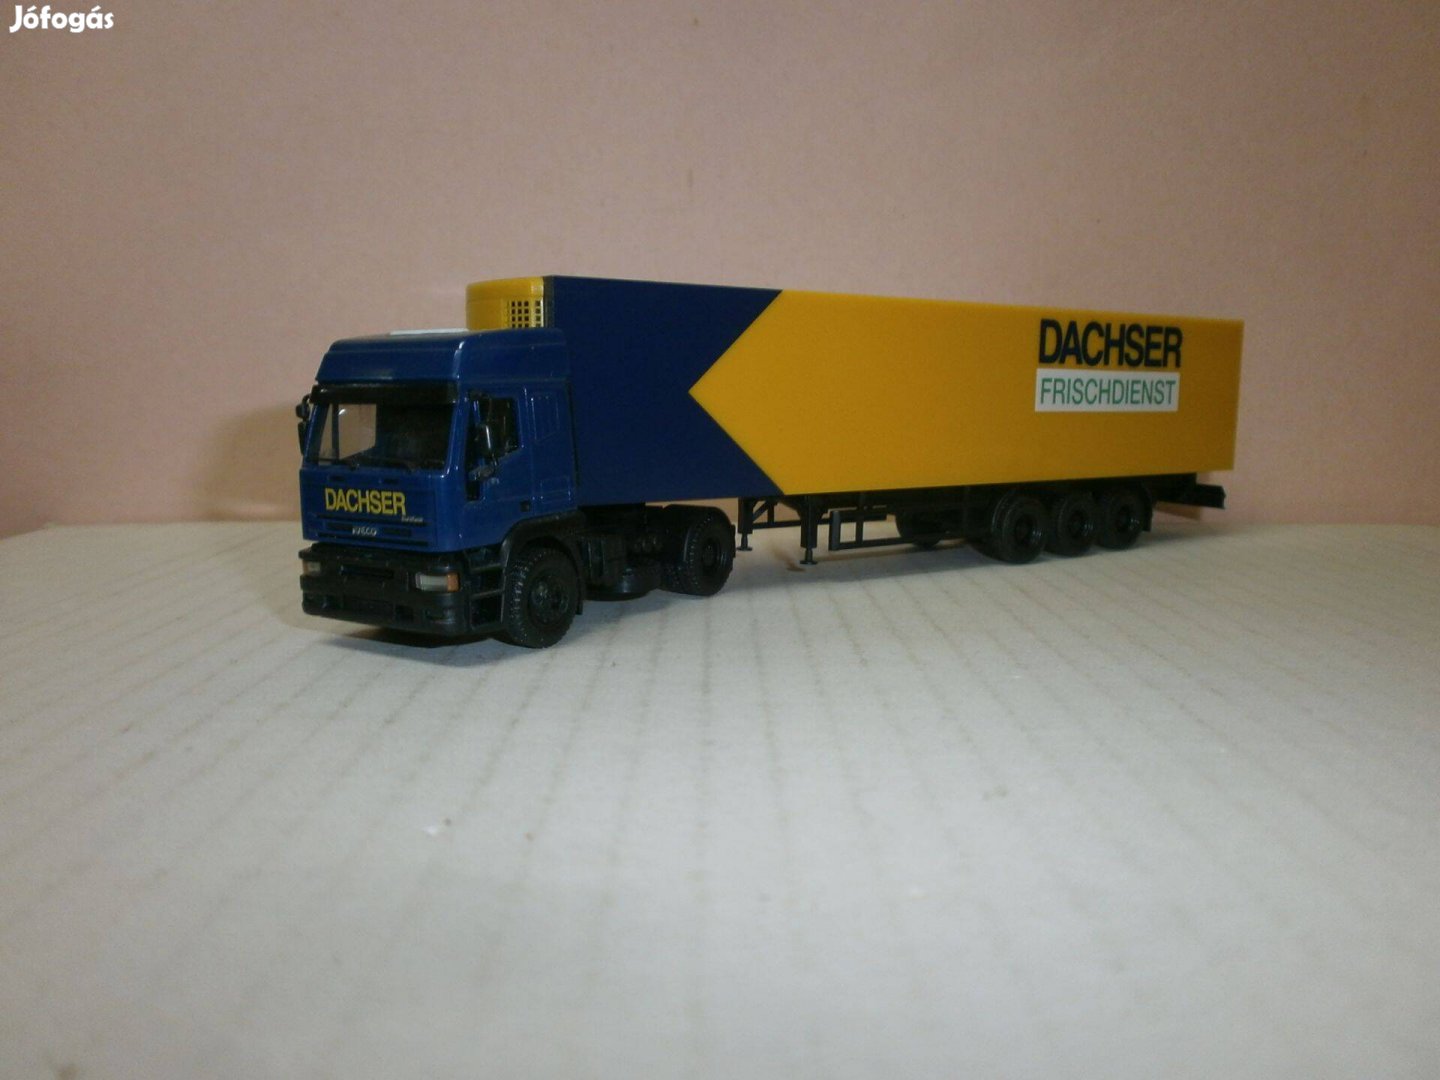 Herpa - Iveci " Dachser" slepper kamion - 1:87 - ( H-19)